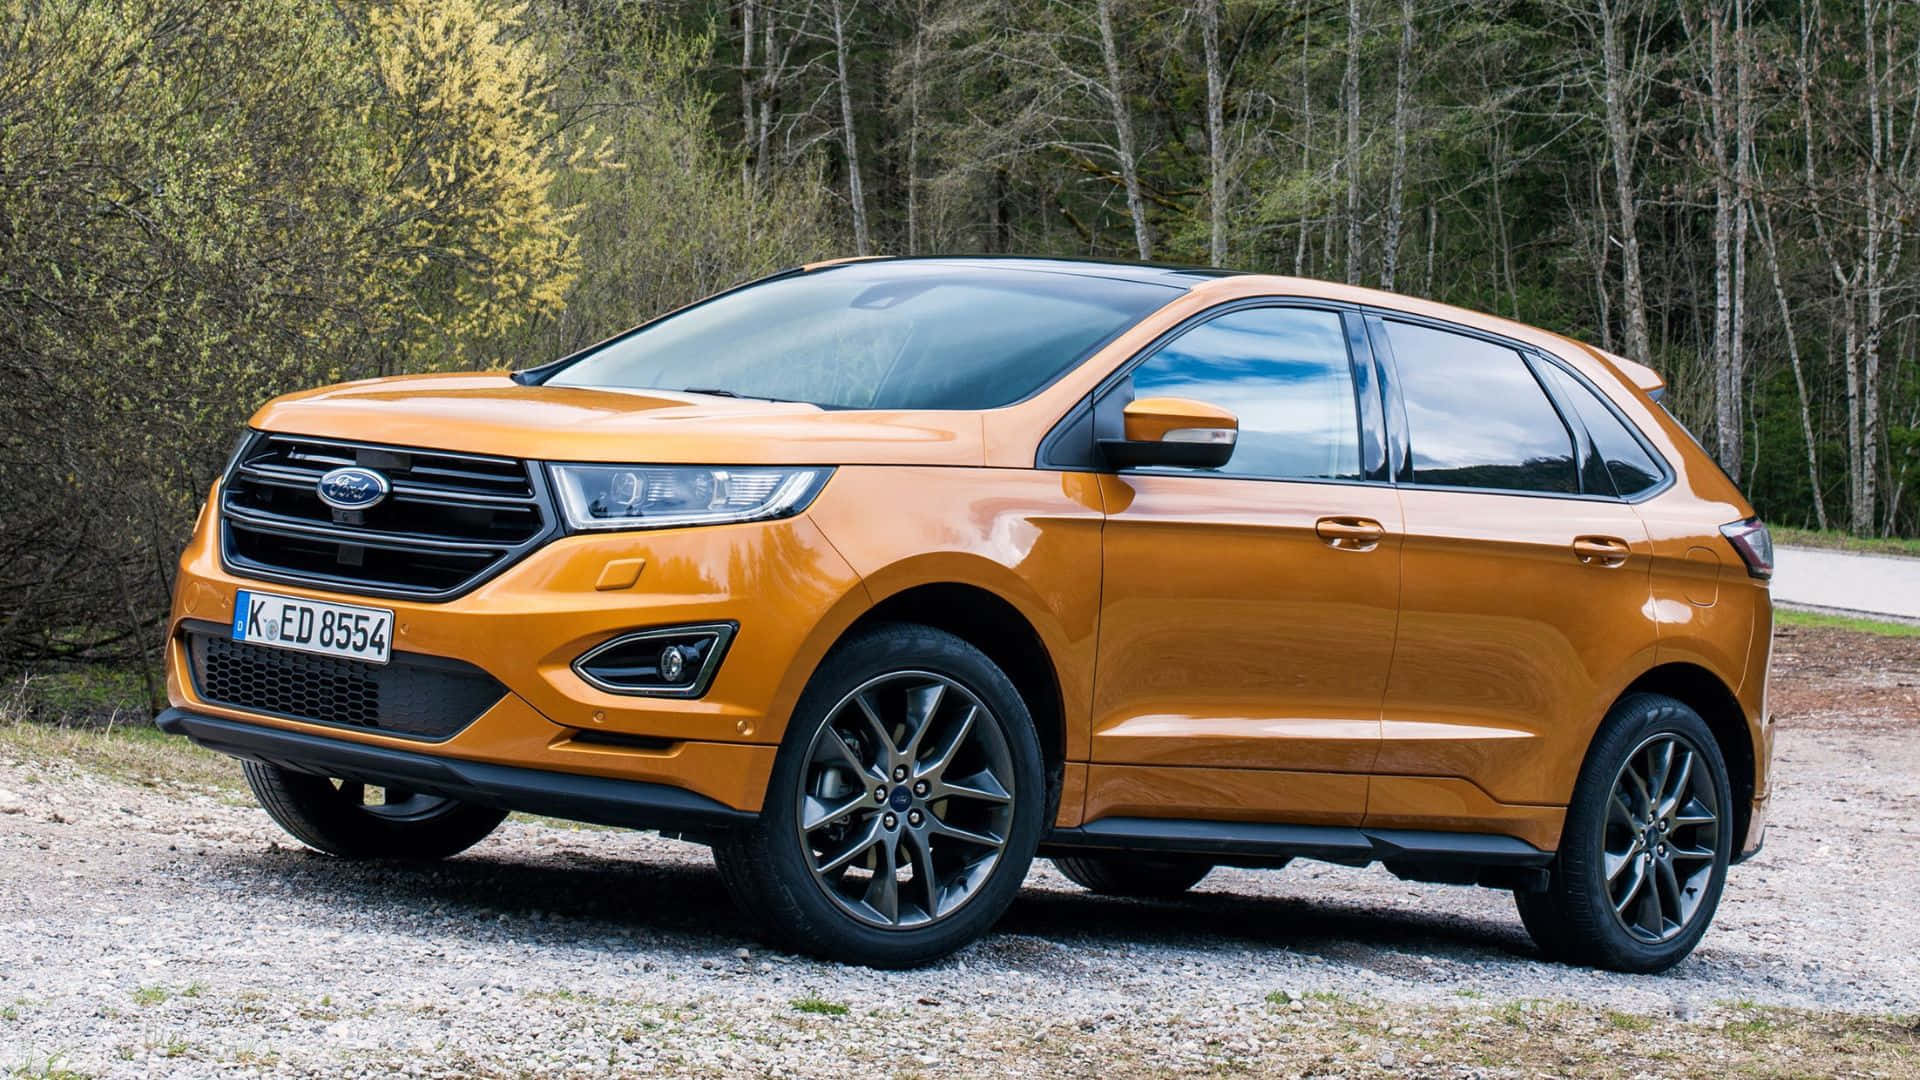 Captivating Ford Edge on the Open Road Wallpaper